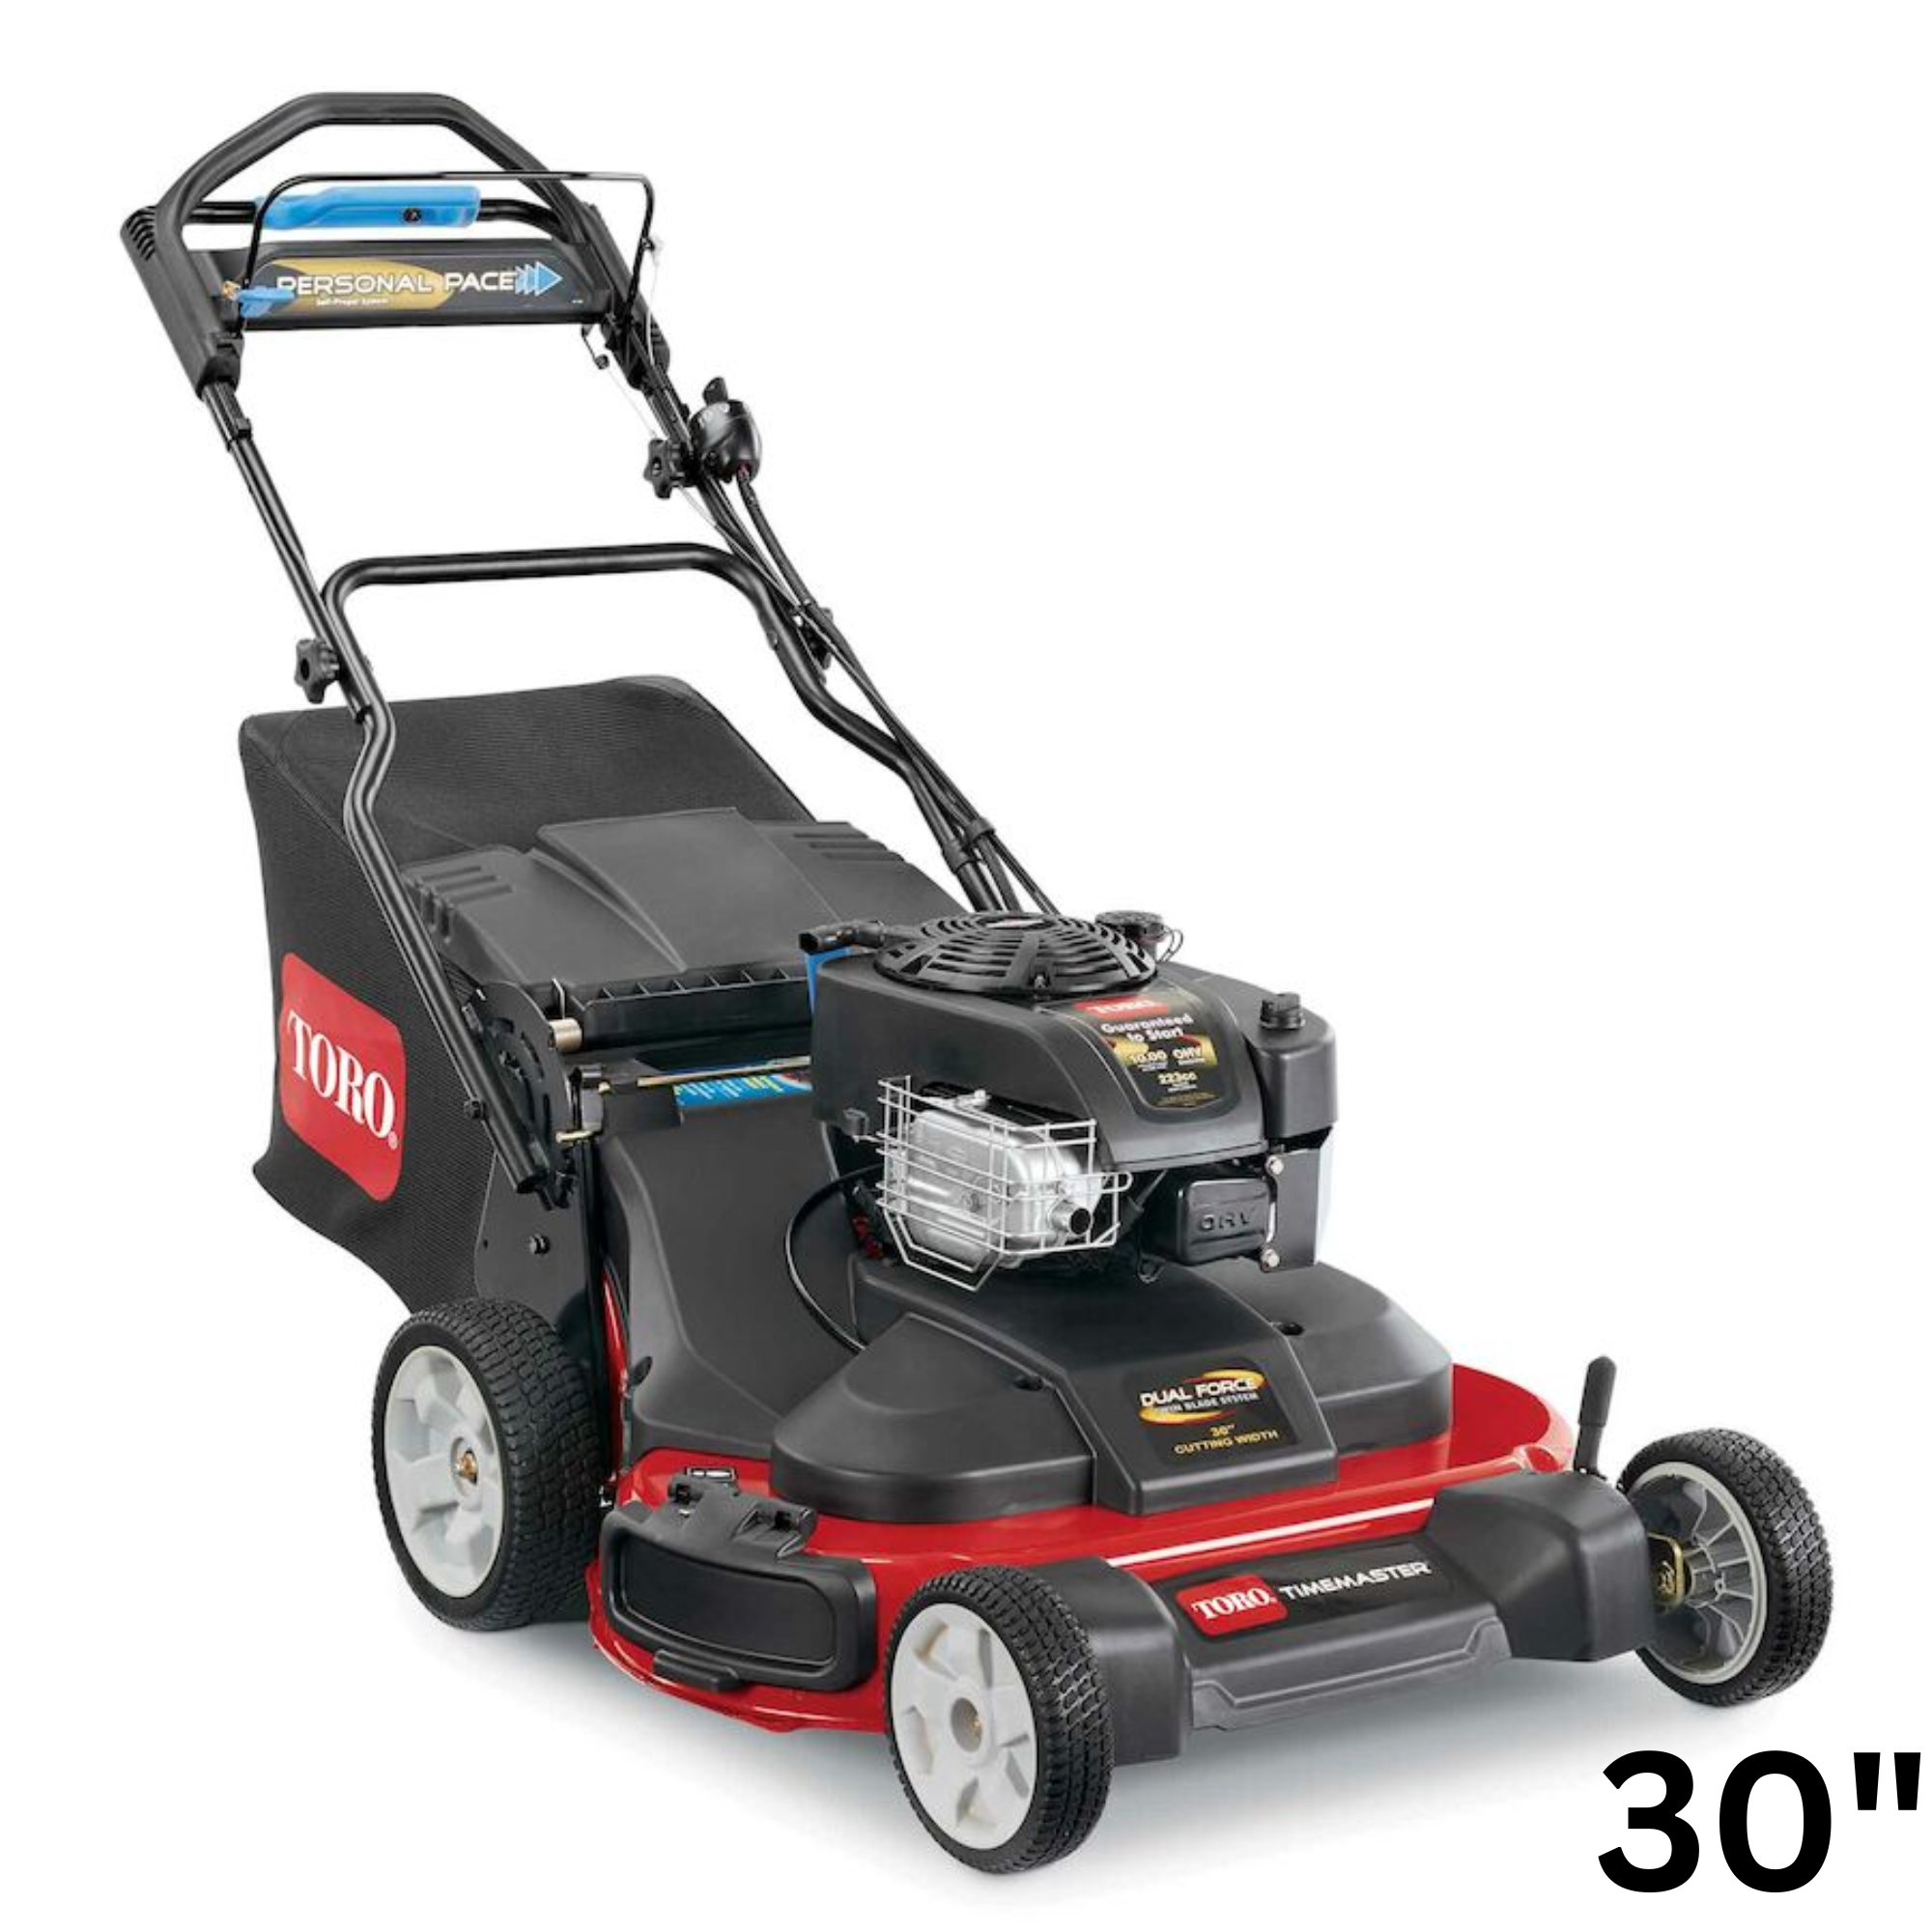 Toro TimeMaster | 30" Deck | Electric Start w/Personal Pace Gas Lawn Mower | 21200